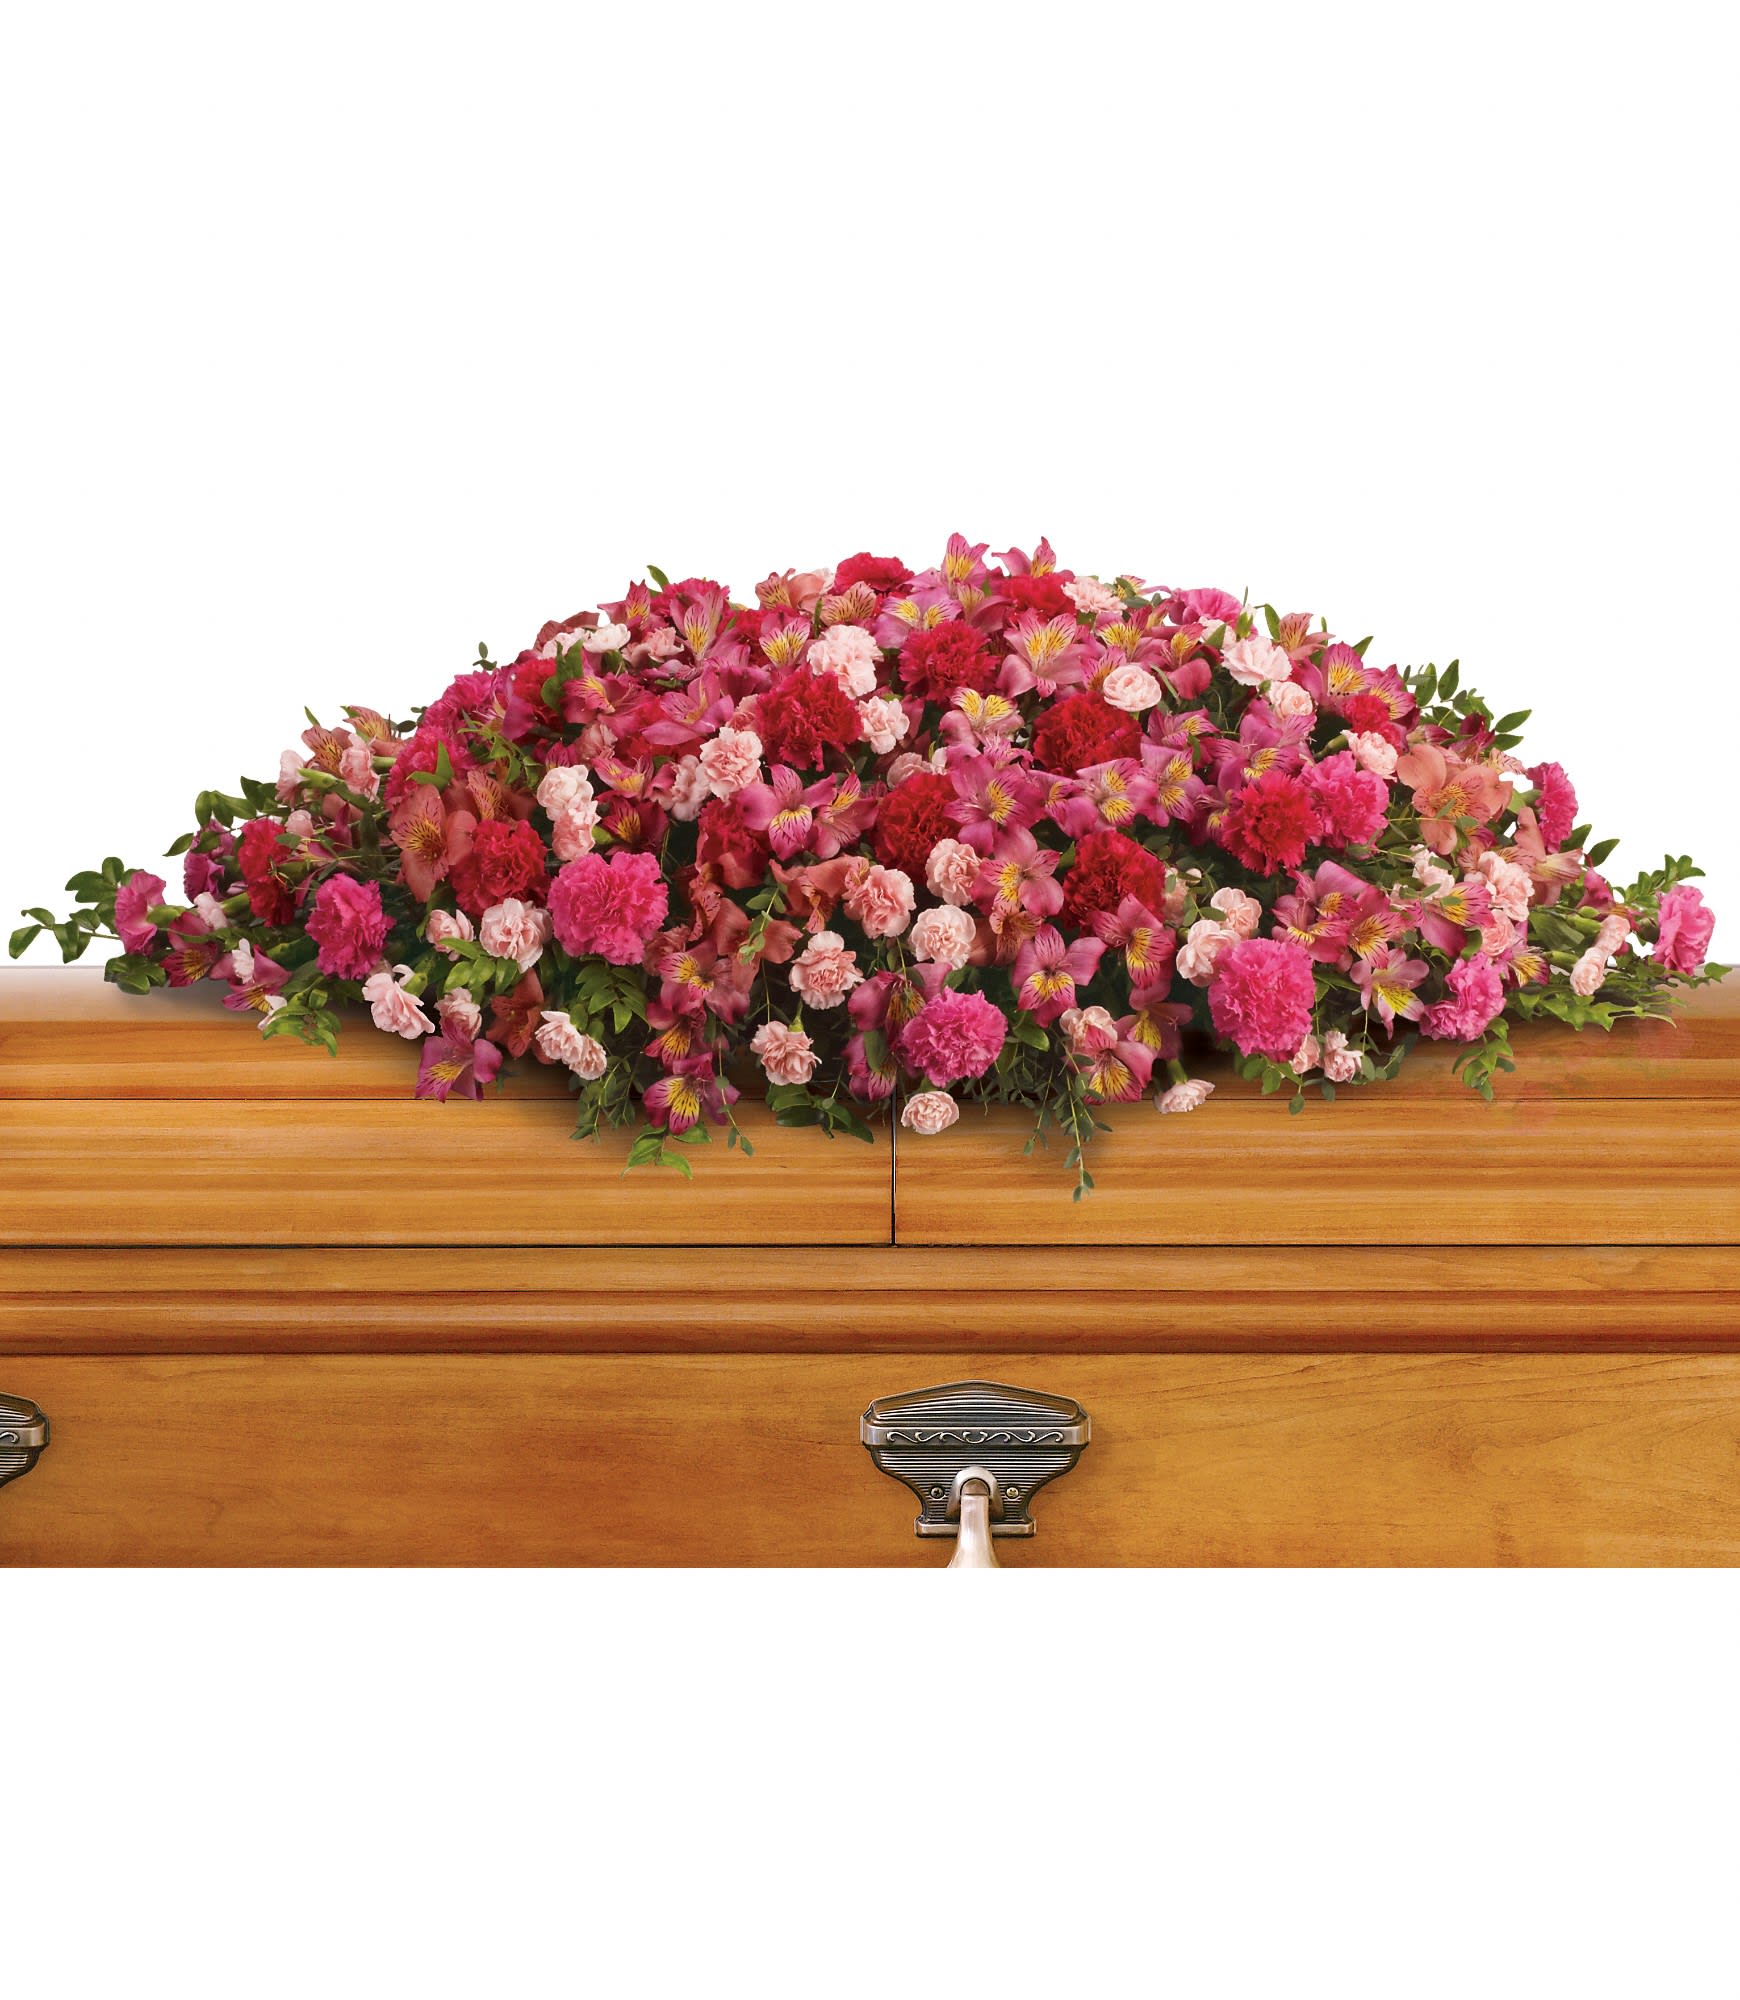 A Life Loved Casket Spray - As a tribute to a special person who has passed, this magnificent cascade of pink floral favorites is a radiant testament of profound and lasting love. T259-3A 